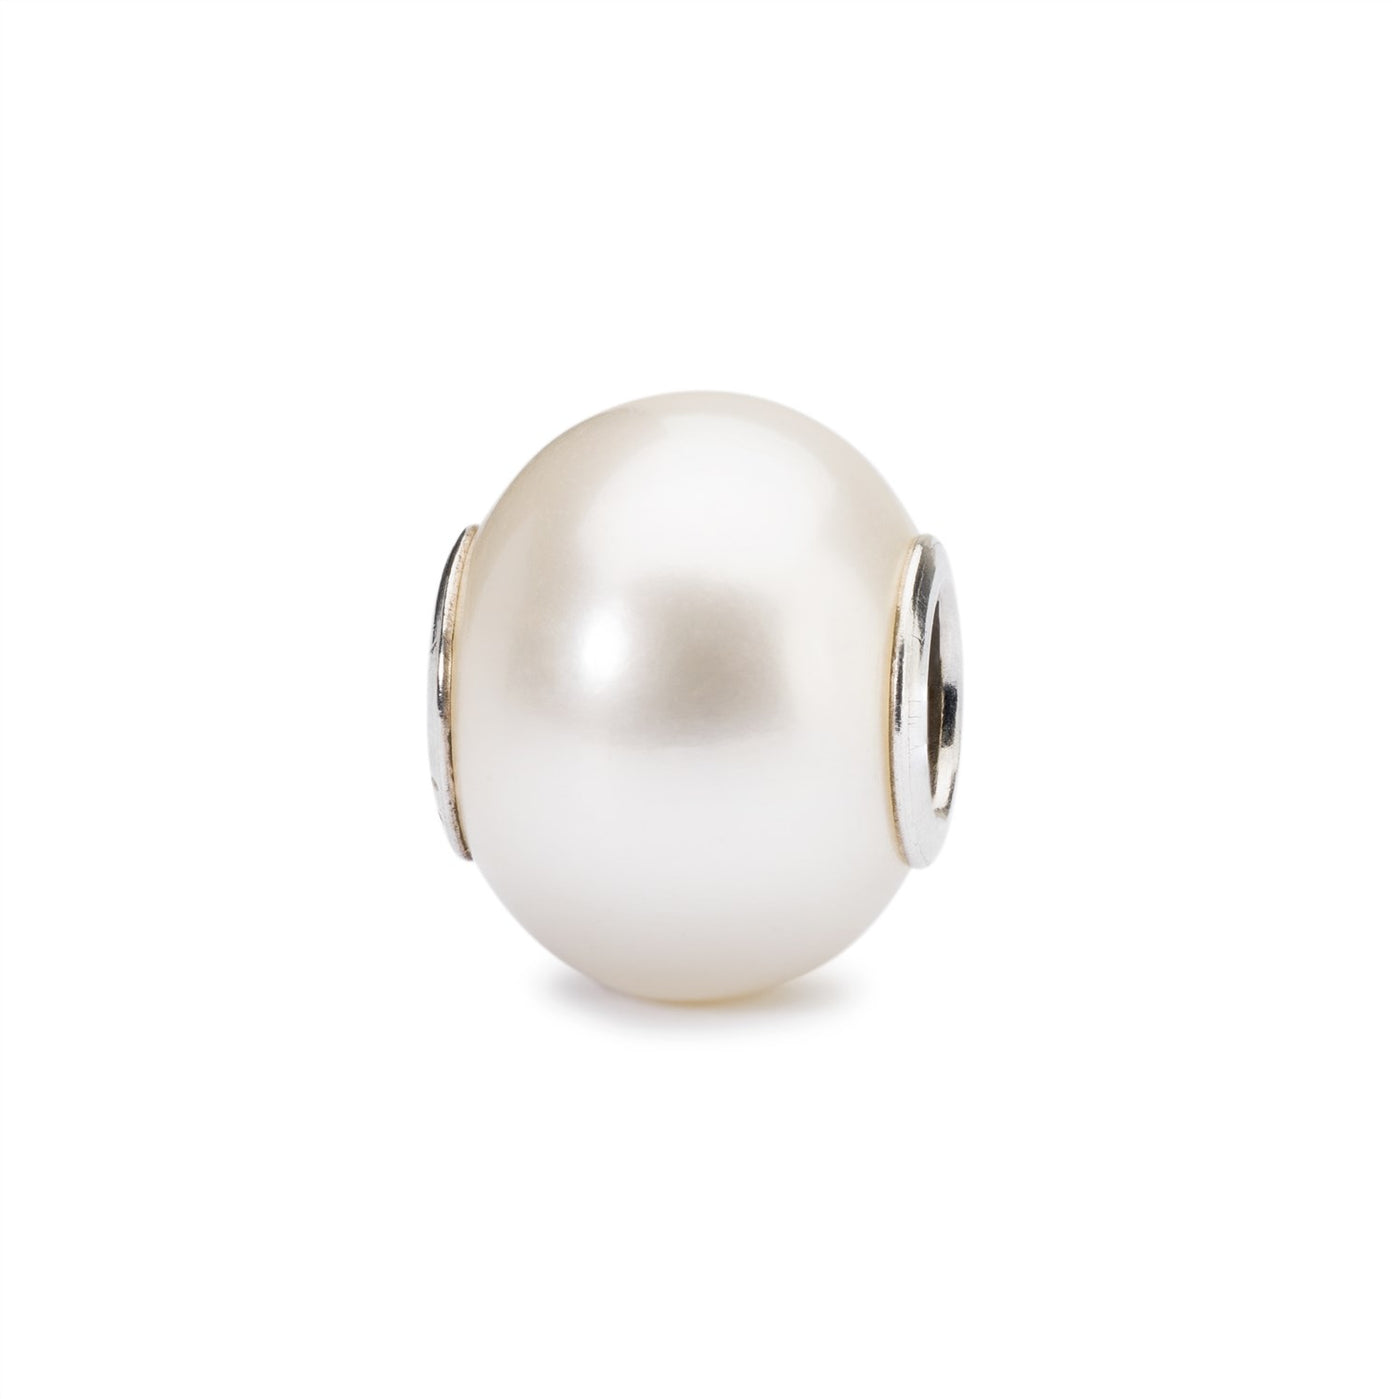 White pearl - a round, smooth, and lustrous bead with a classic design and a inner silver core perfect for creating a sophisticated look.